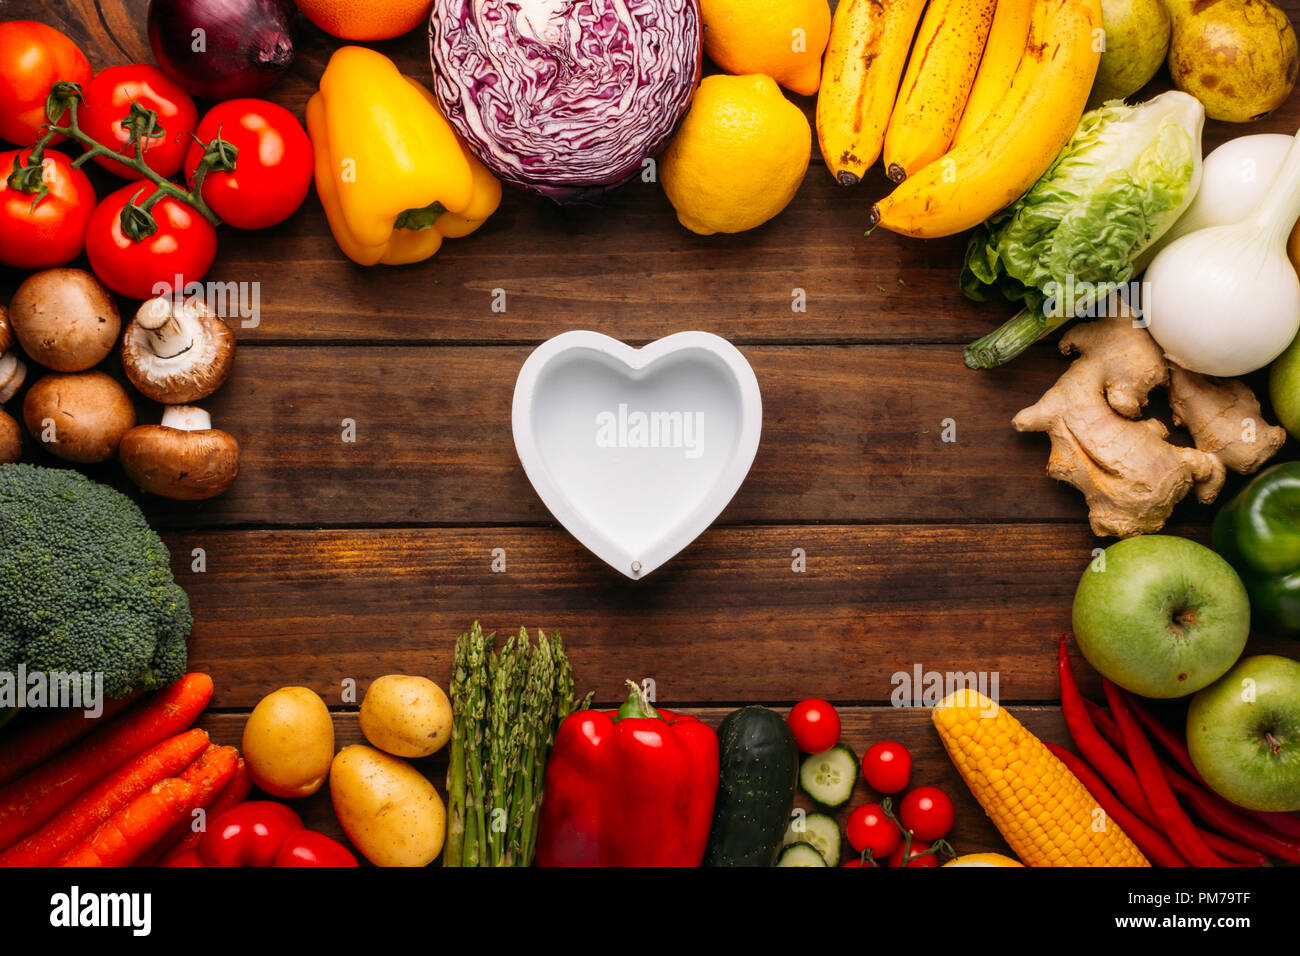 Top view of a wooden table full of vegetables and in the middle of the image an empty heart shaped dish, conceptual photo, food lover Stock Photo